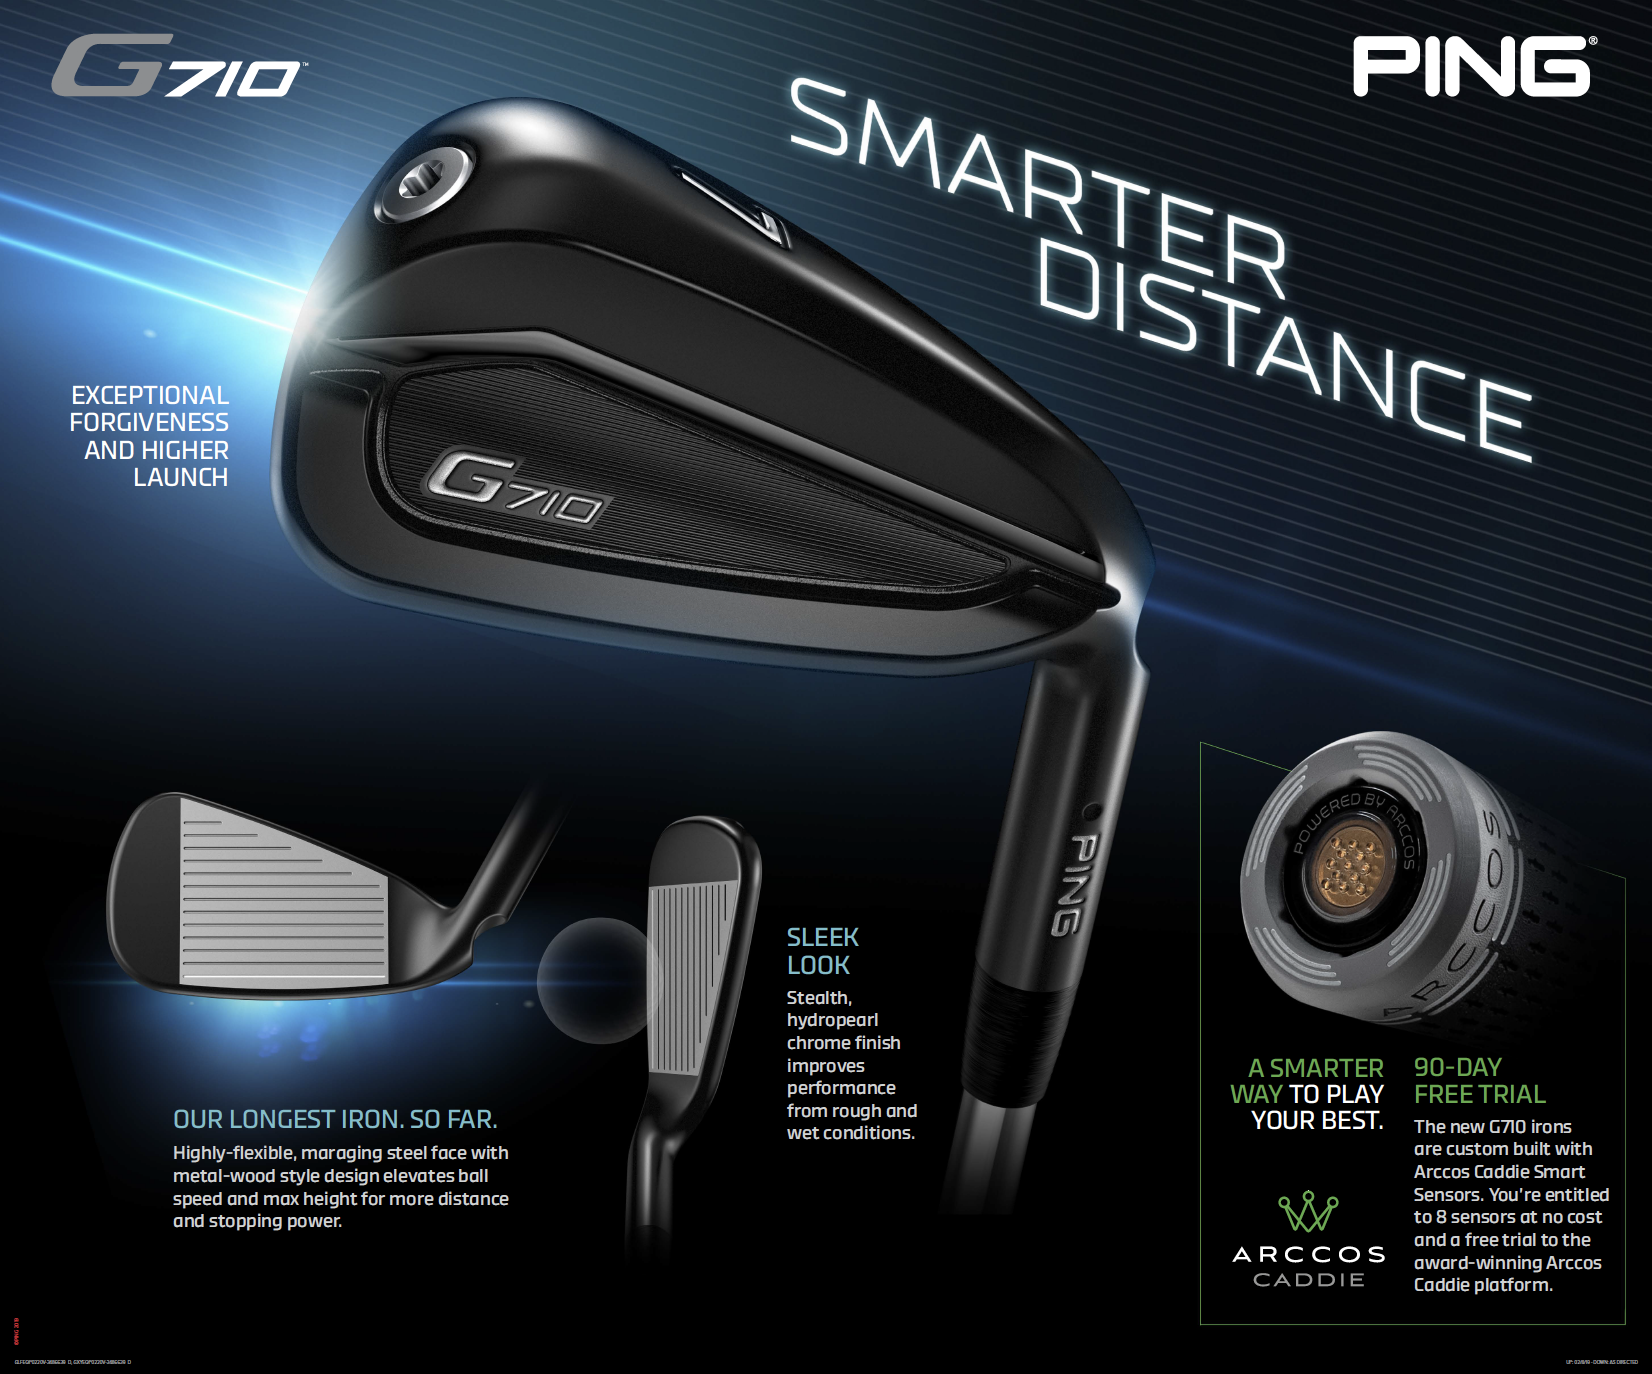 PING G710 Irons Give Golfers Smarter Distance